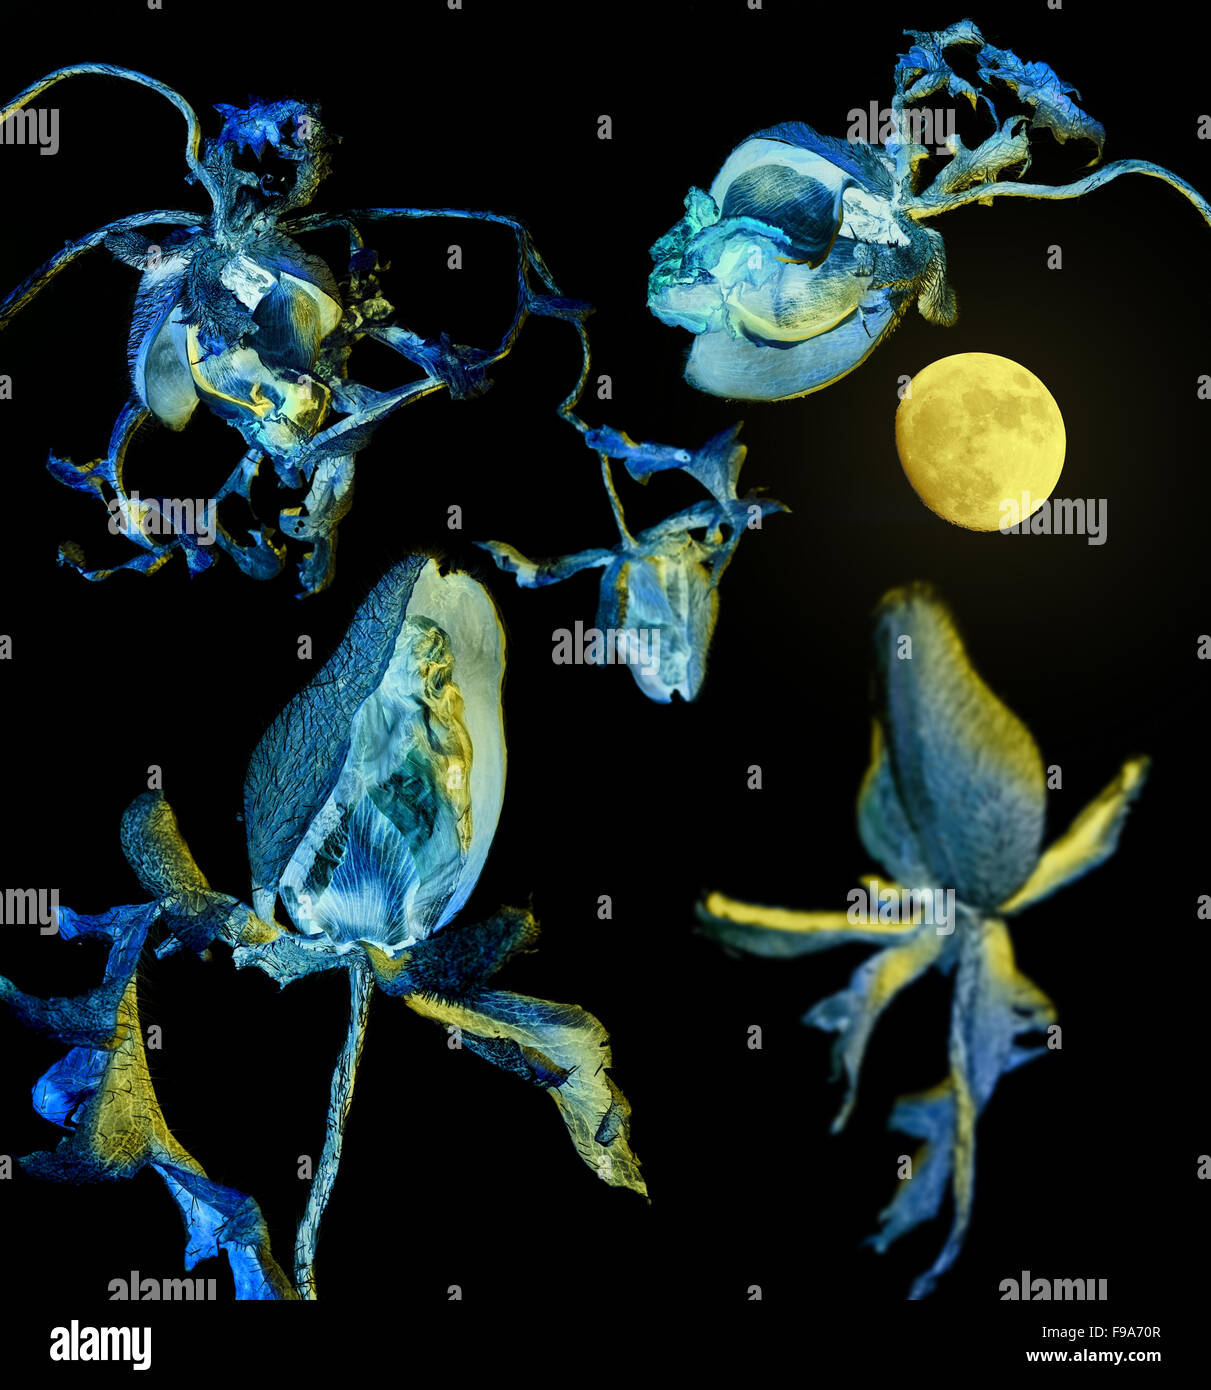 dry  blue toned flowerheads illuminated by a yellow moon in dark ambiance Stock Photo